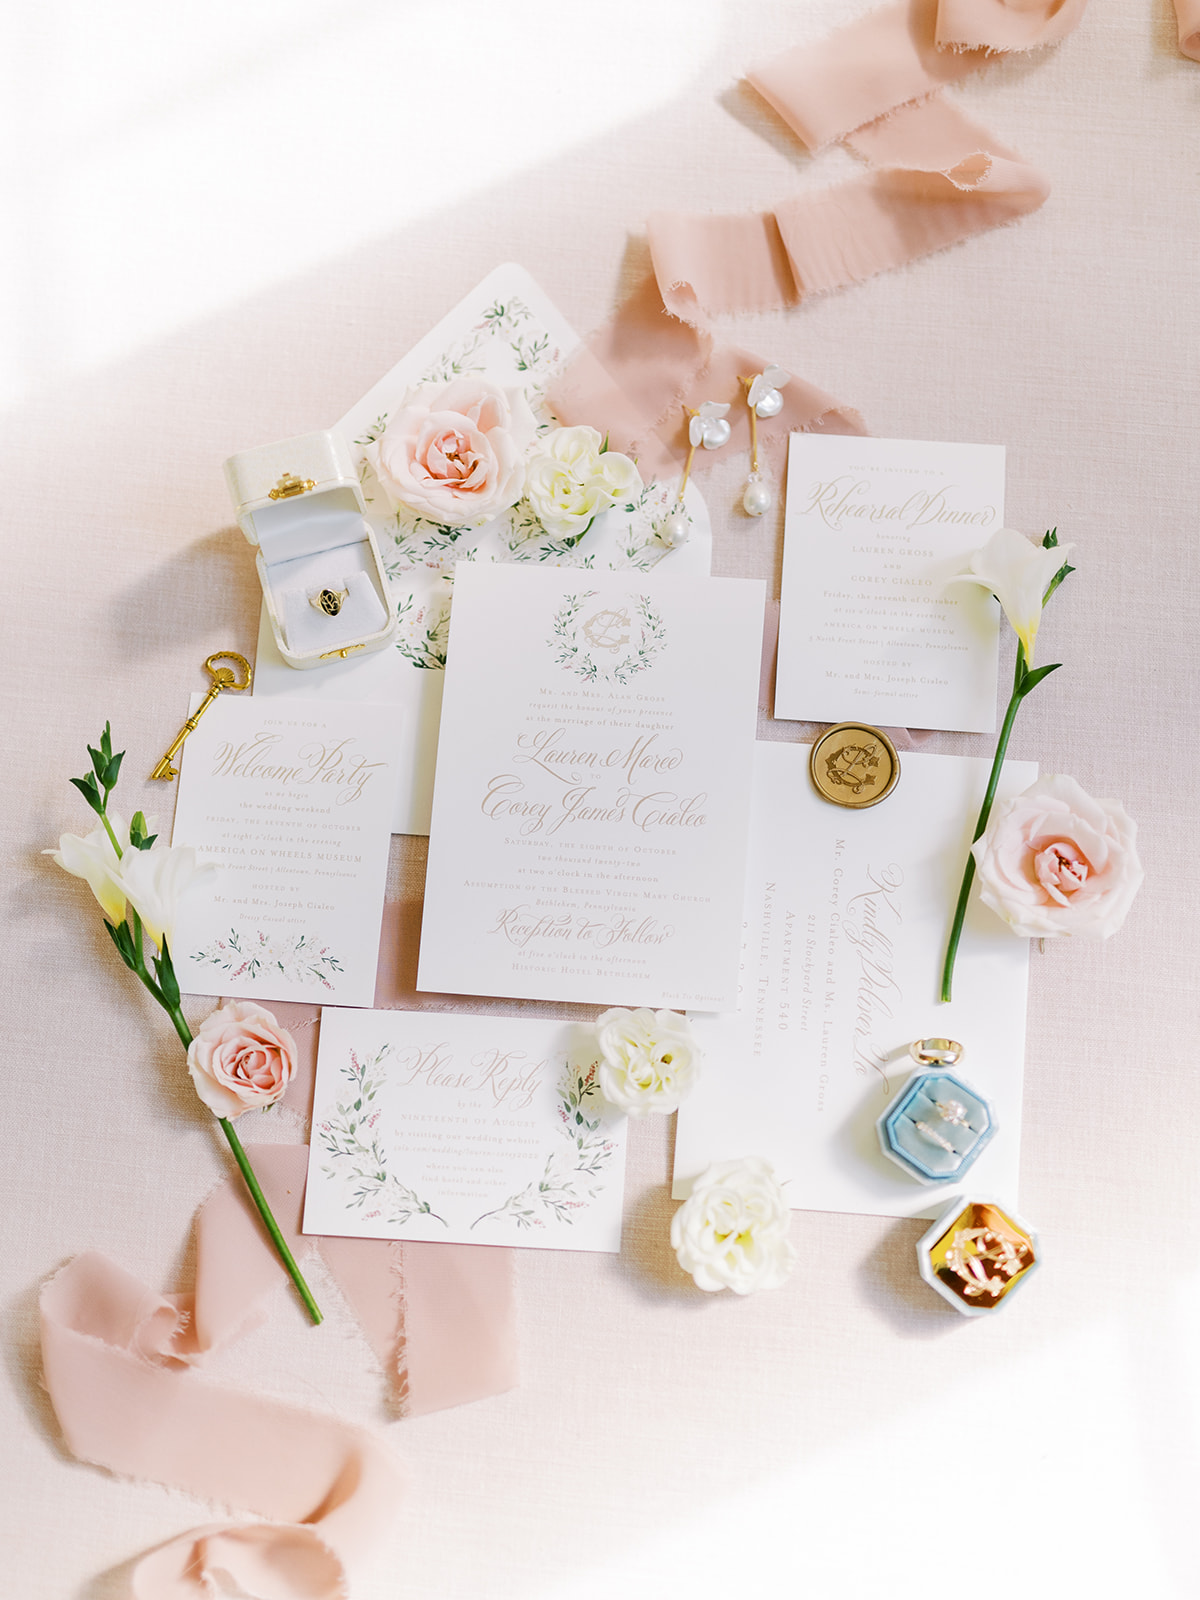 invitation suite laid on pink linen with flowers